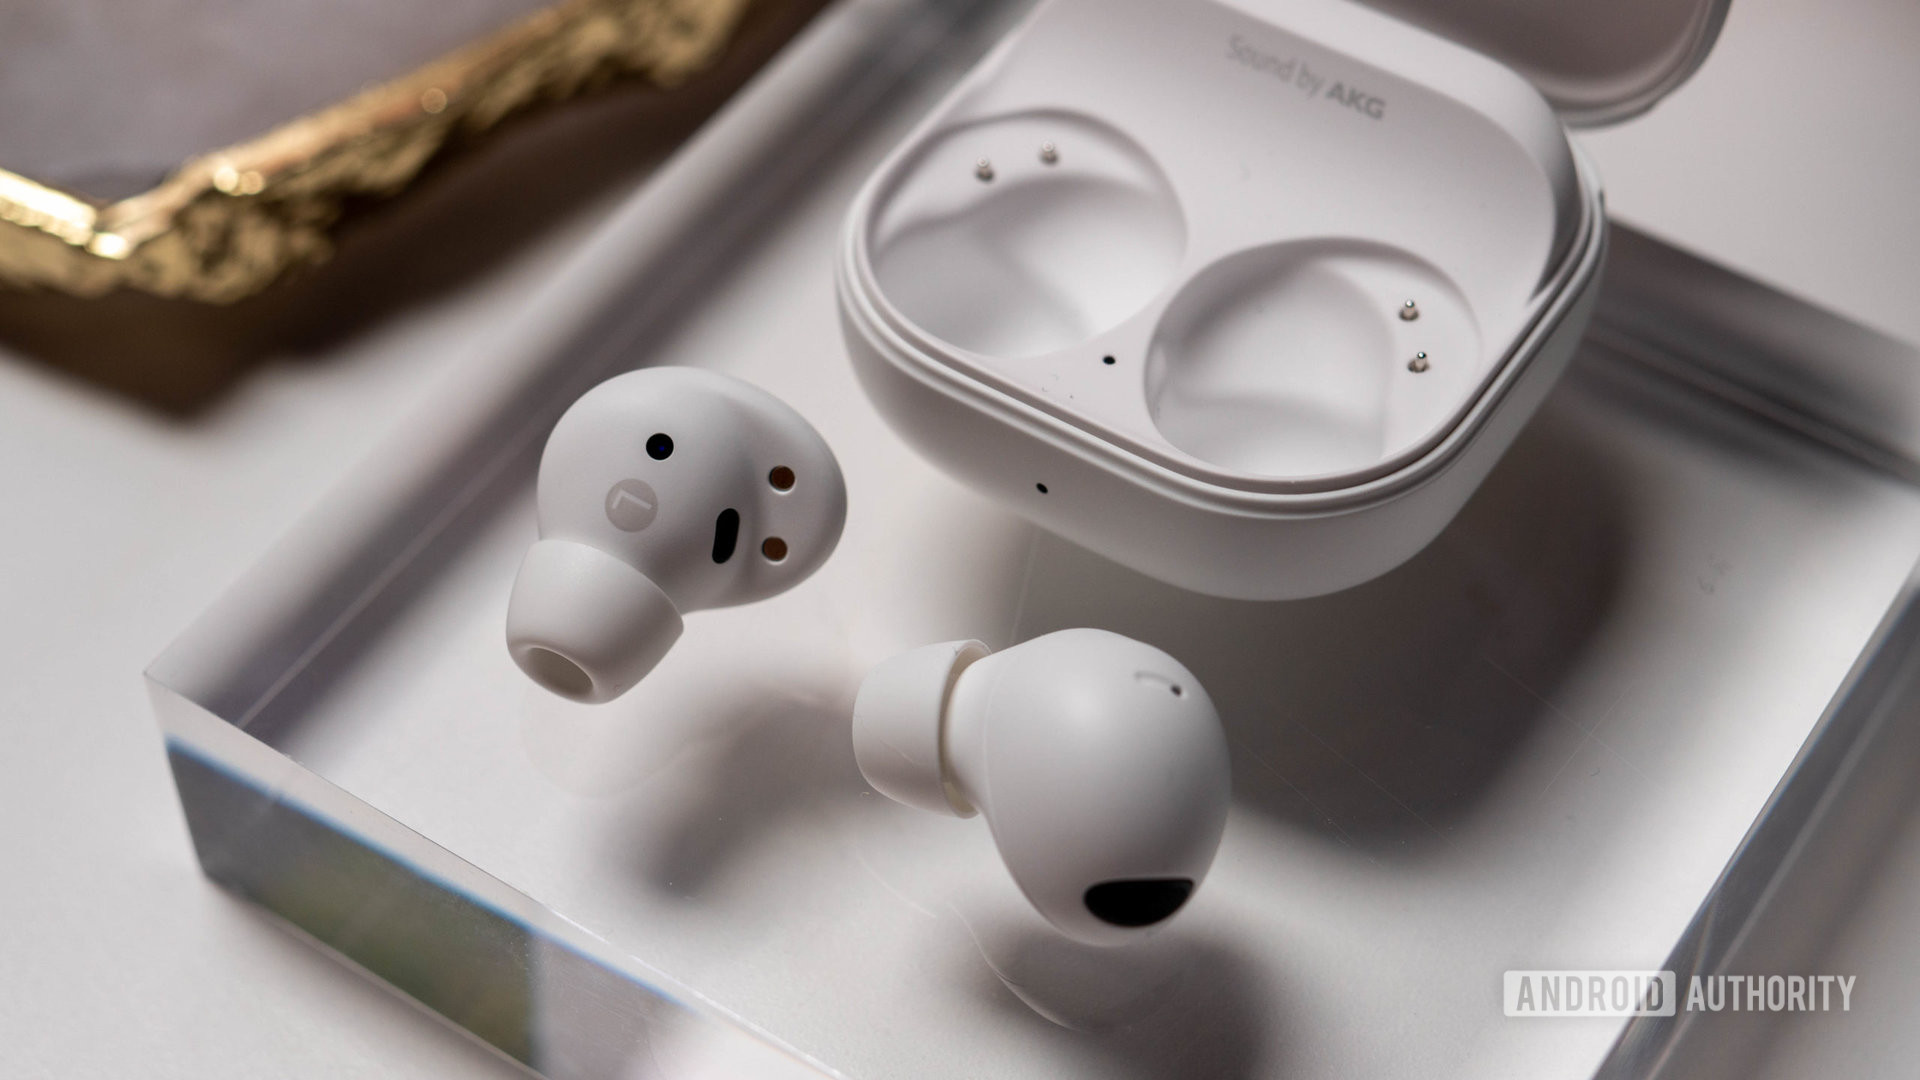 Samsung Galaxy Buds 2 Pro in white color next to charging case